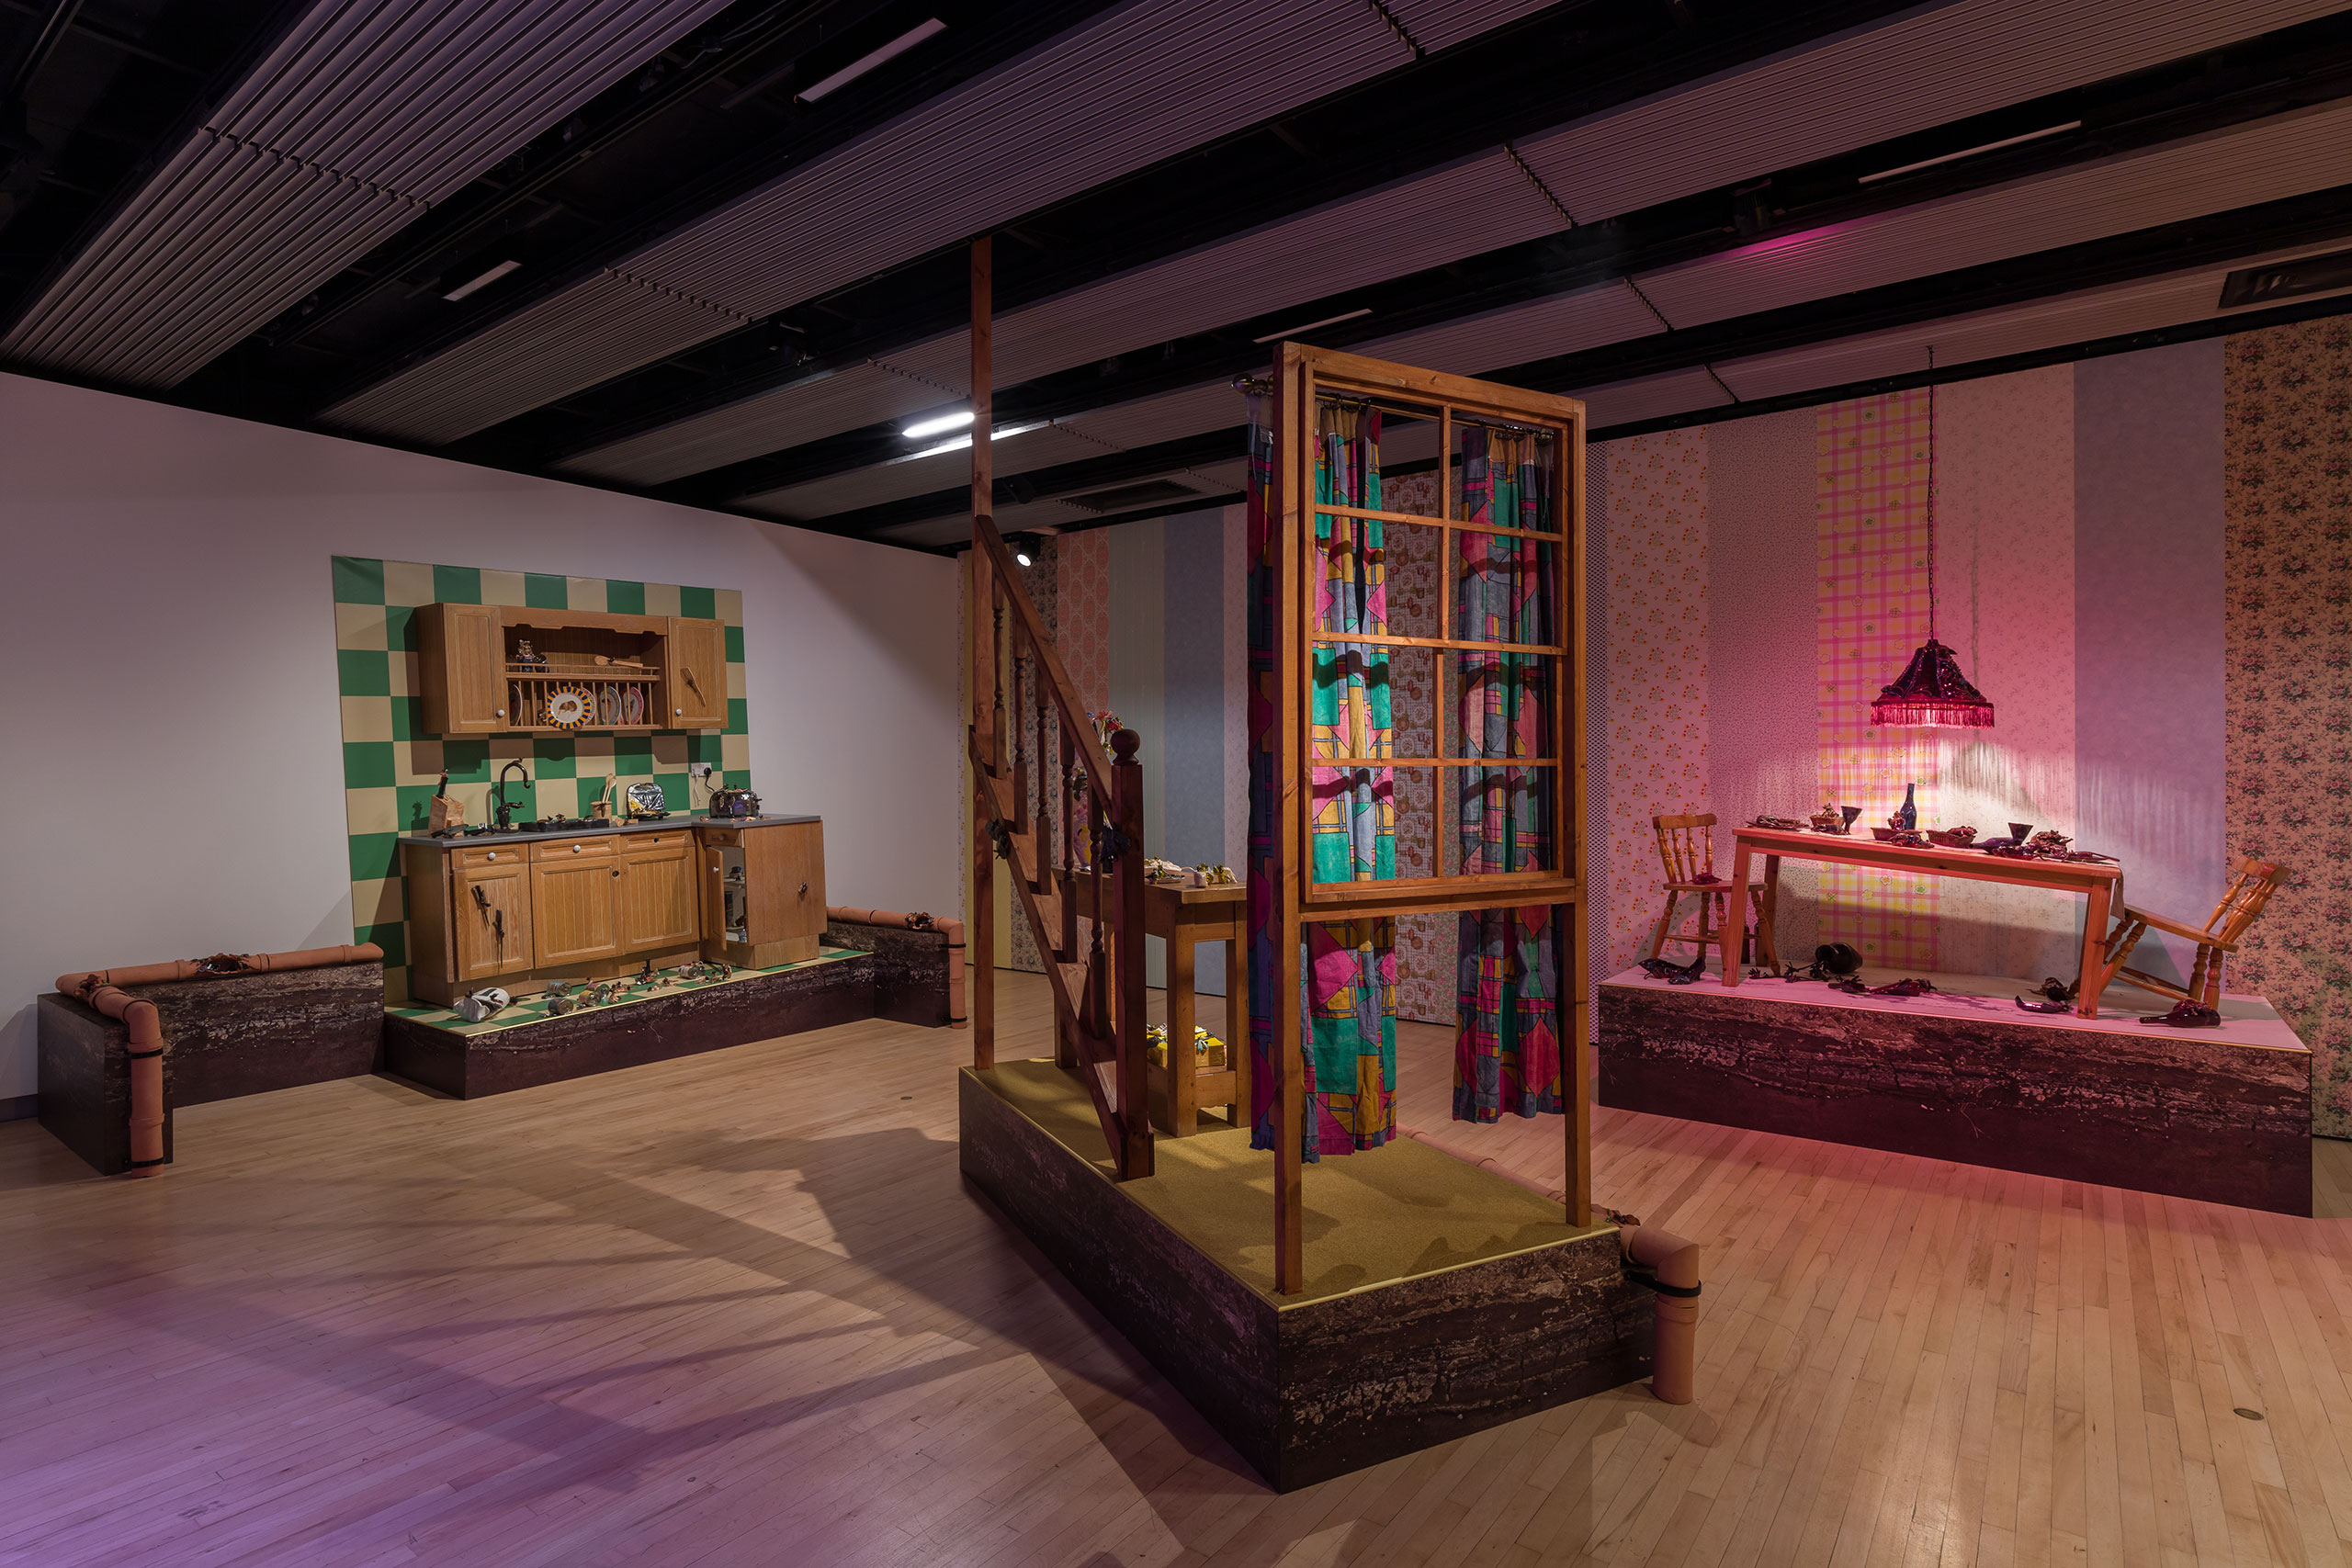 Installation view of Lindsey Mendick, Strange Clay: Ceramics in Contemporary Art at the Hayward Gallery (26 October 2022 - 8 January 2023). Photo: Mark Blower. Courtesy the Hayward Gallery.